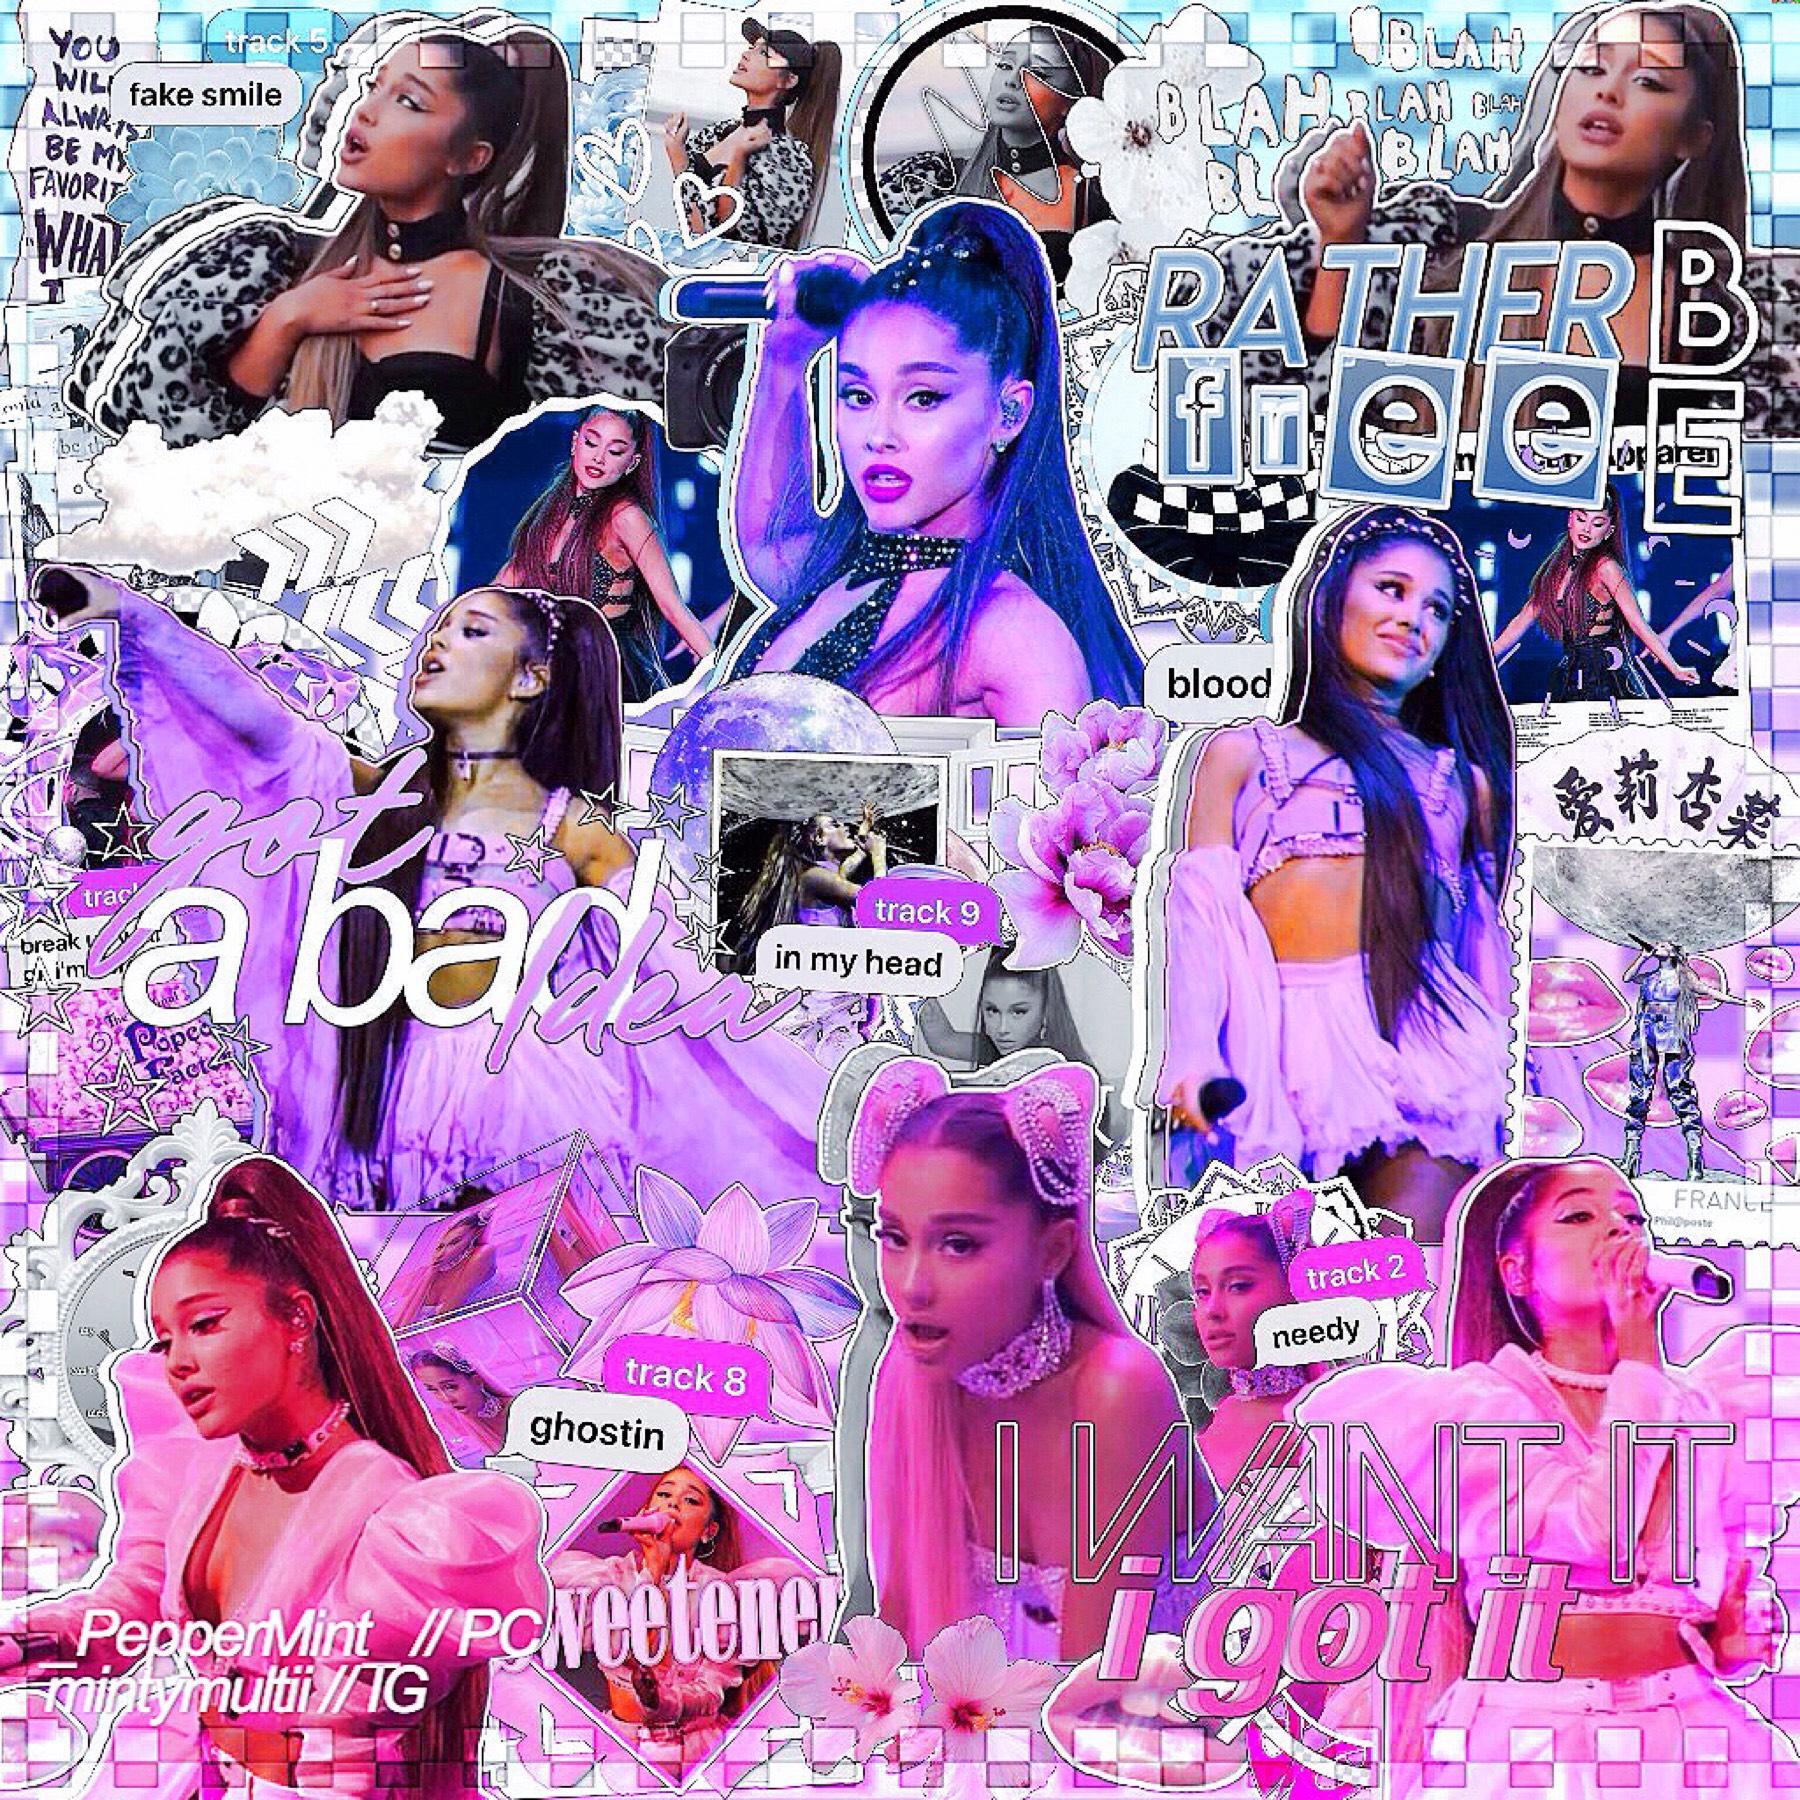 hiii this is my edit for the second round of the Instagram games I'm in (: I had to use only premades from their page which was very different for me🤗